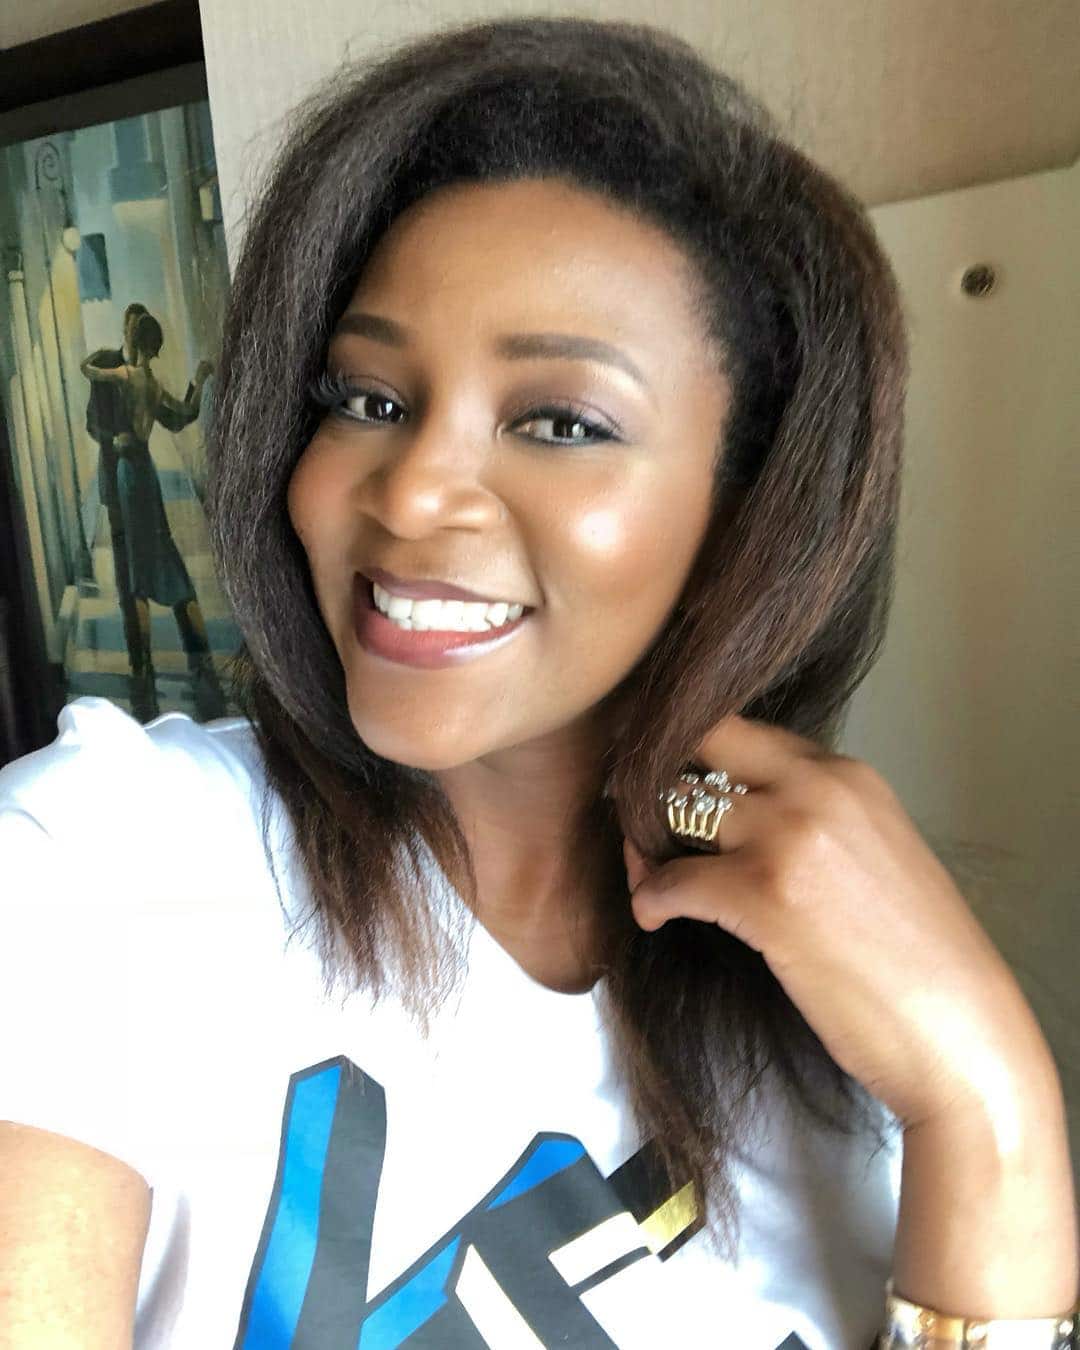 Before and after Photos of Genevieve Nnaji as she marks her 39th birthday